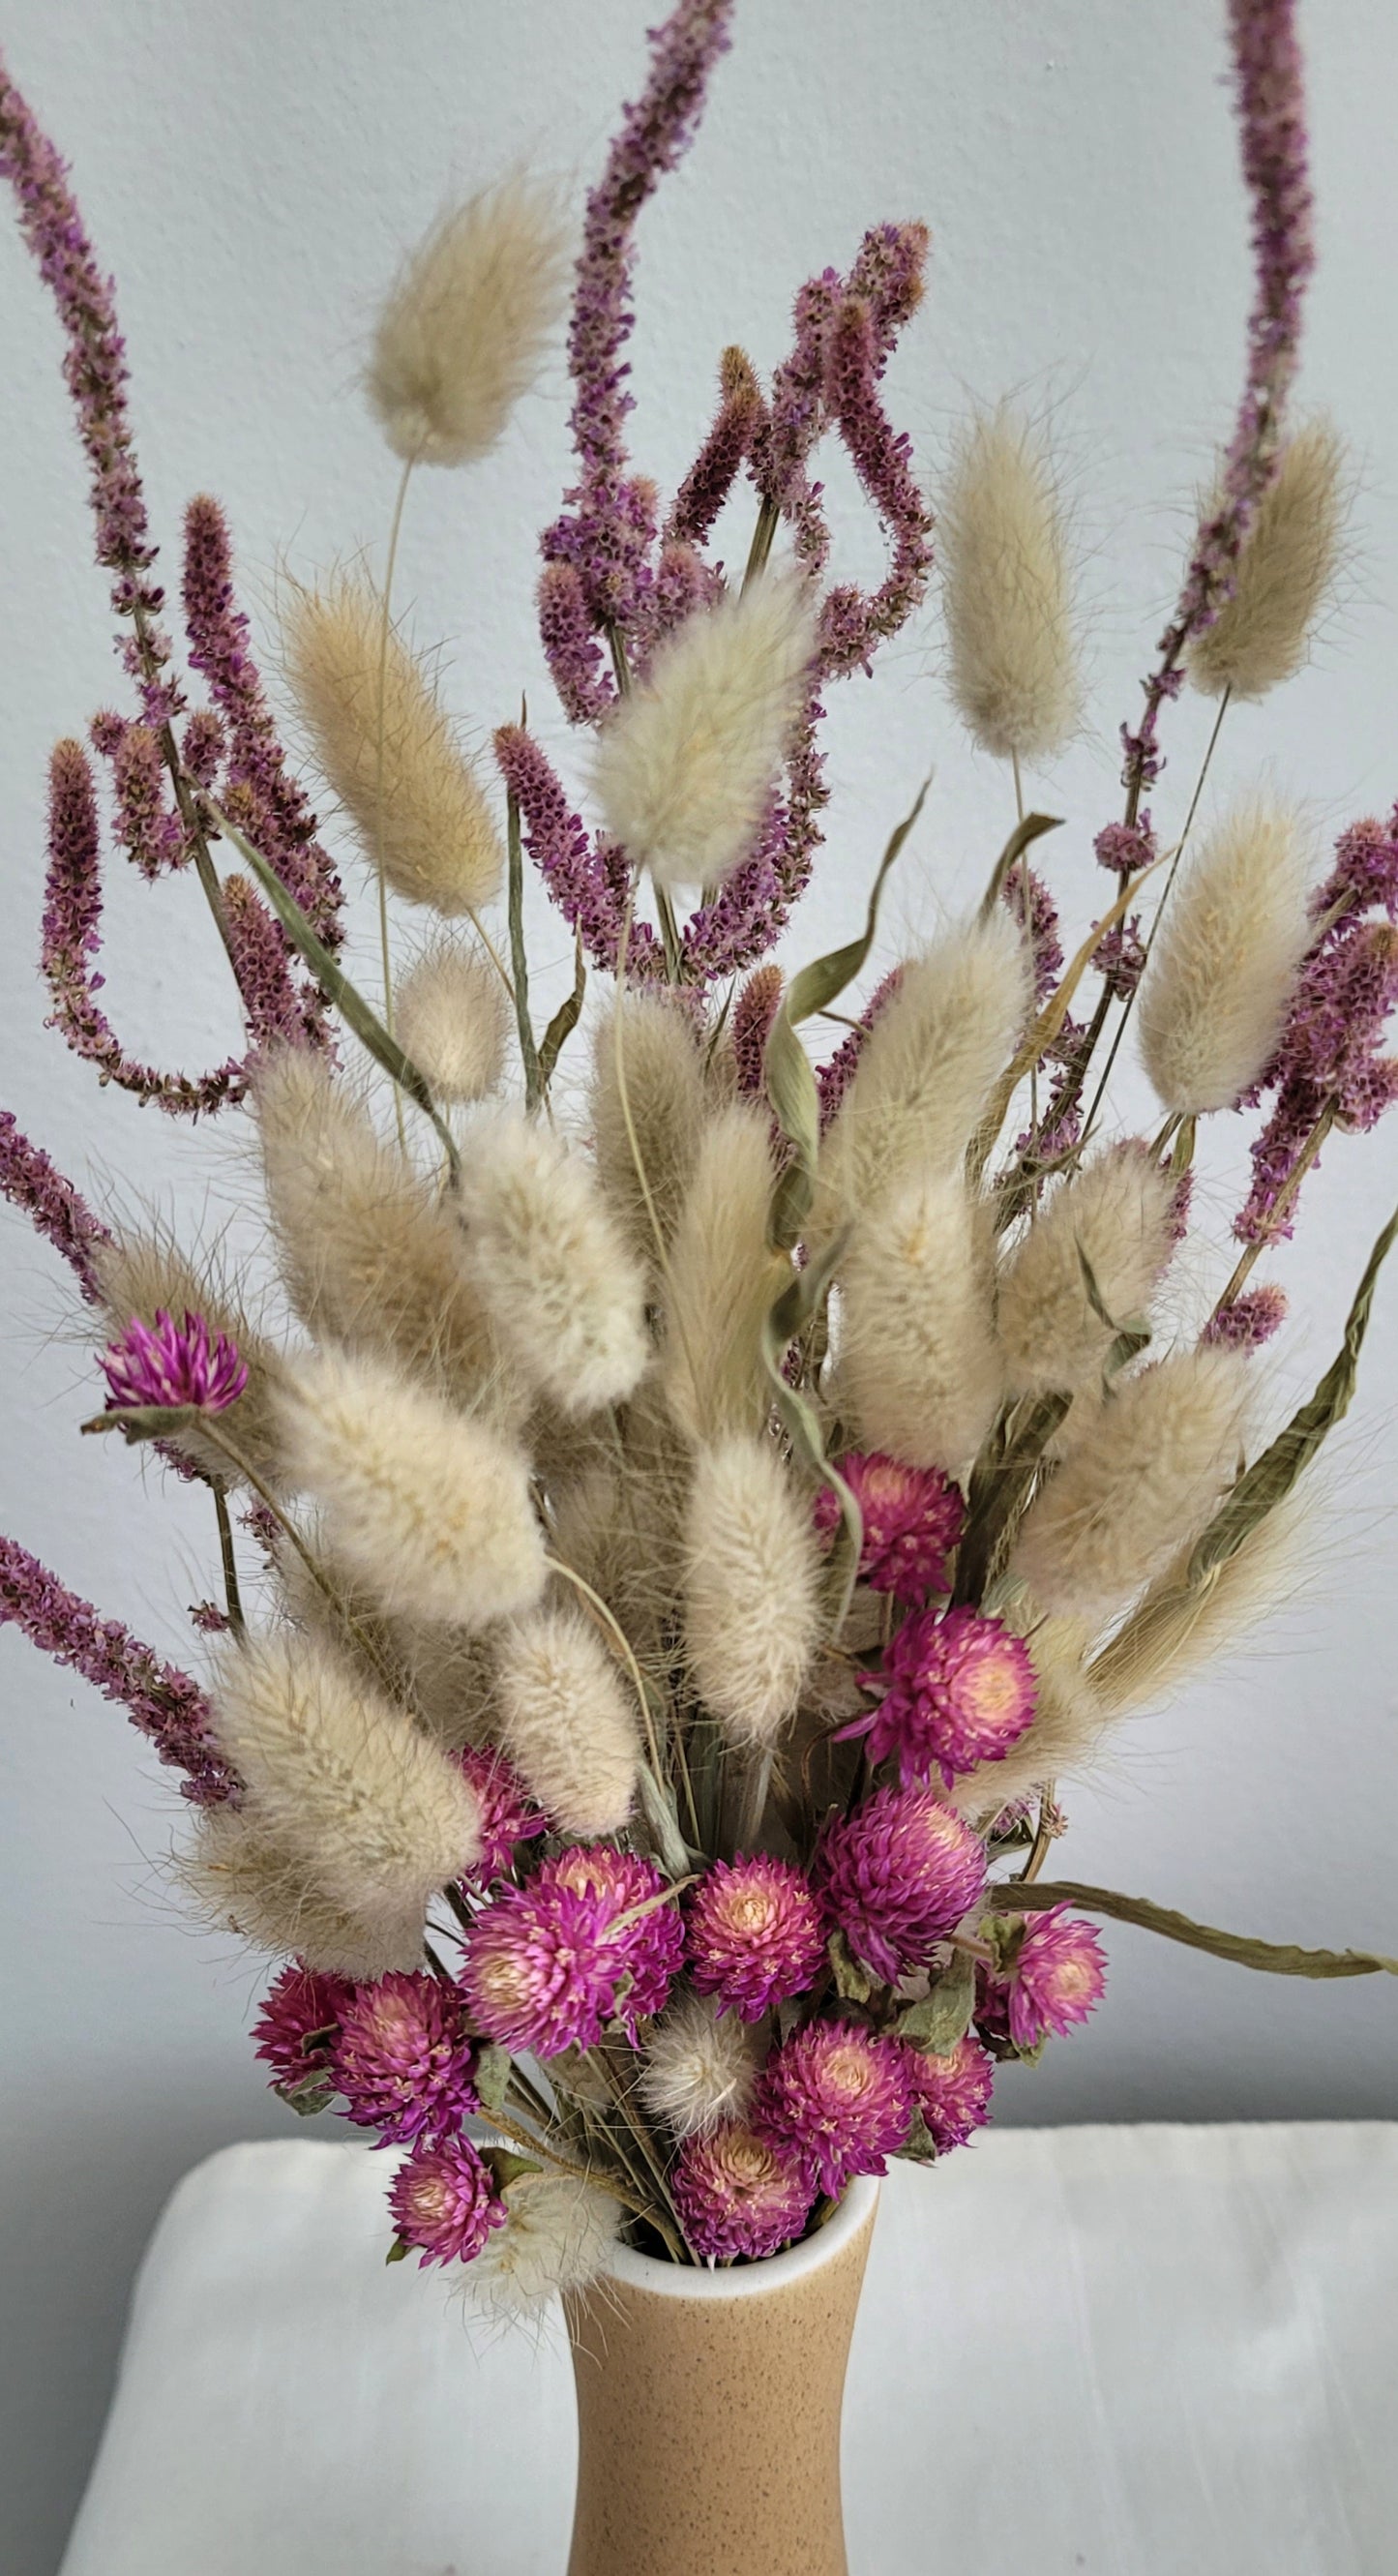 Dried Flowers in a small ceramic vase